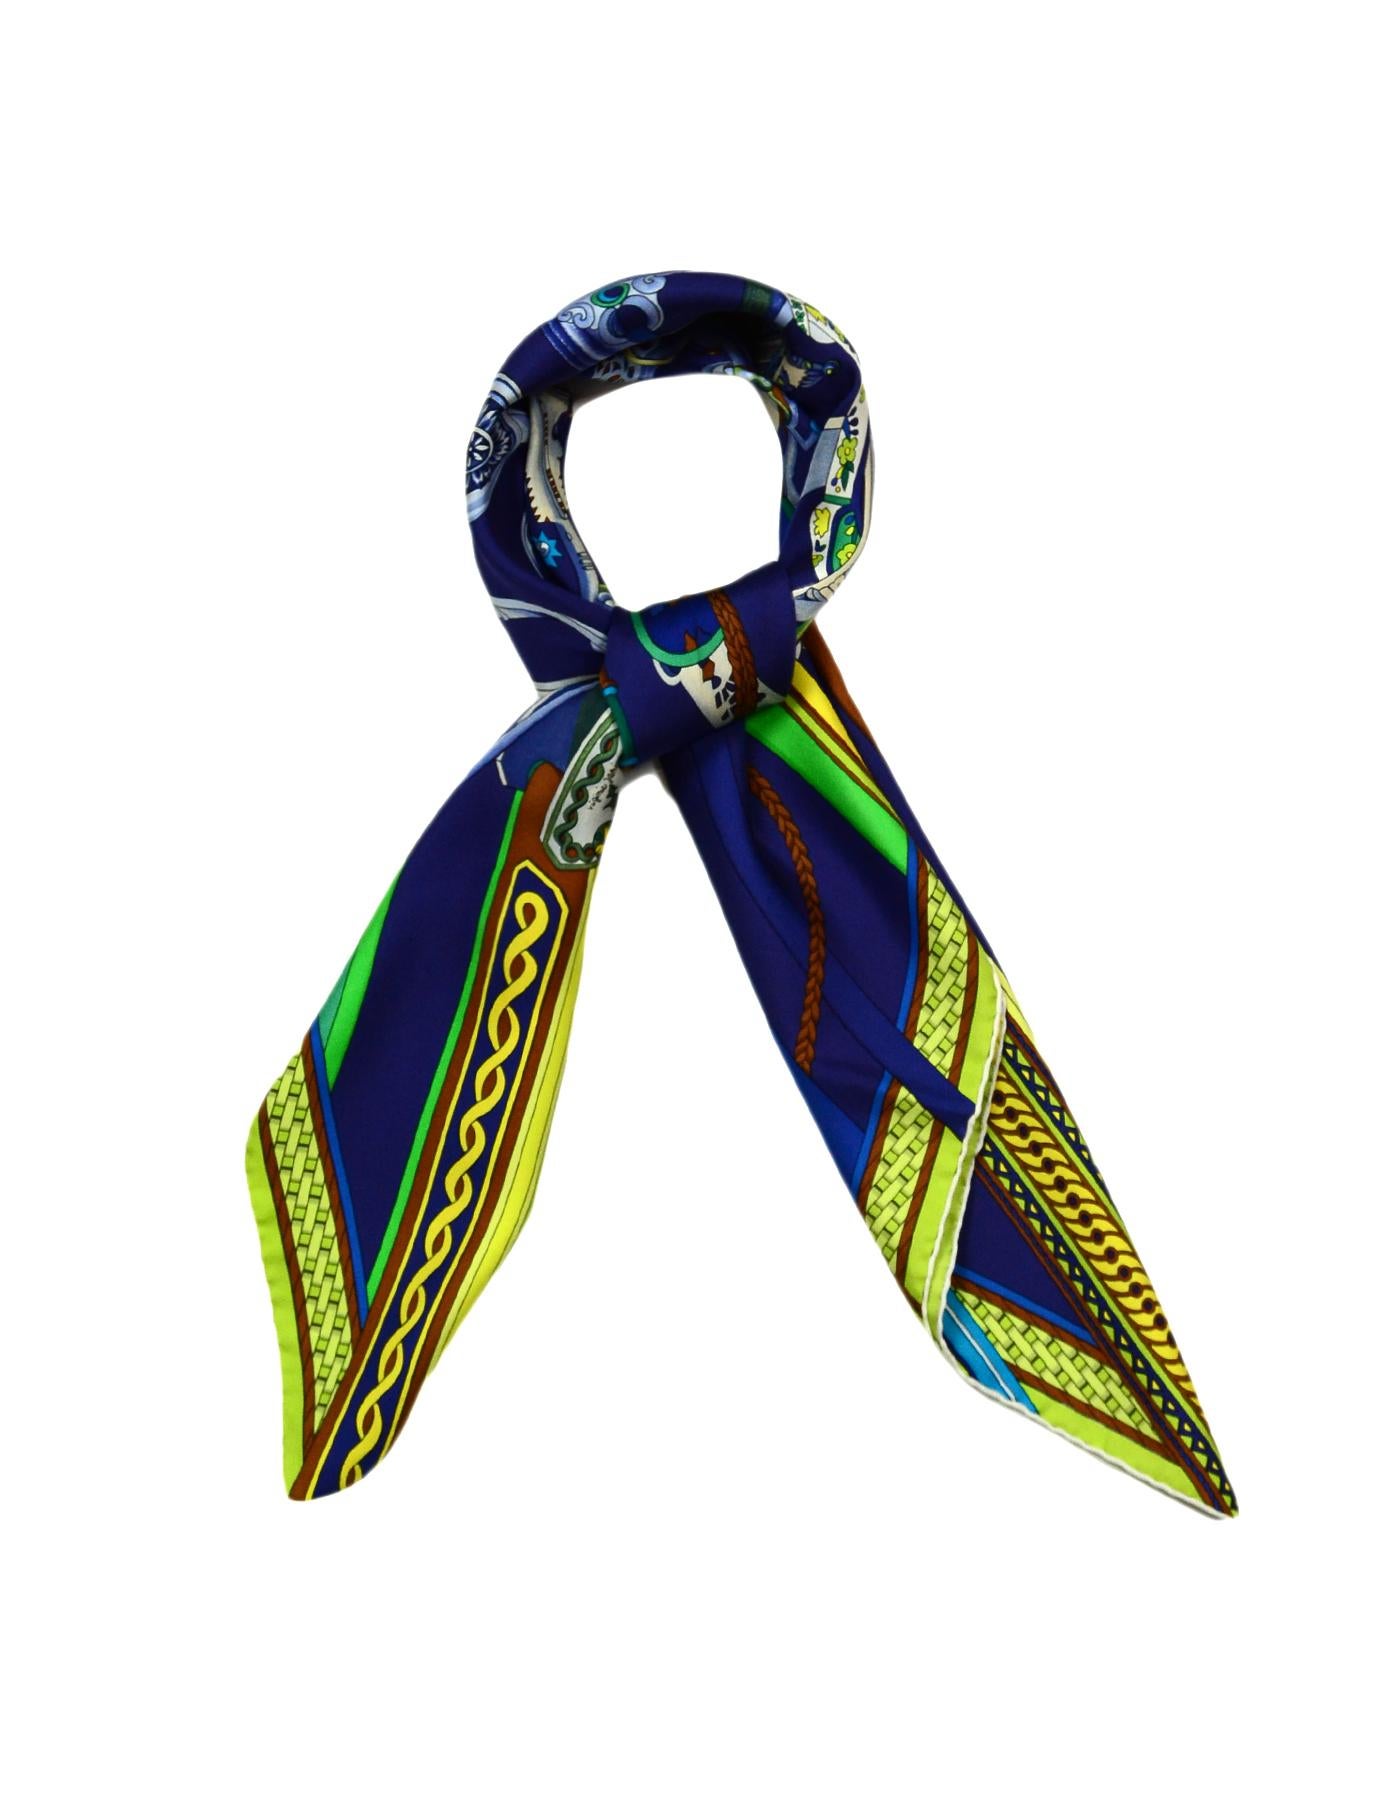 Hermes Blue/Green Concours D'Etriers 90cm Silk Scarf

Made In: France
Designed By: Virginie Jamin
Color: Blue, green, white brown, yellow
Materials: 100% silk
Overall Condition: Excellent pre-owned condition
Estimated Retail: $415 + tax
Includes: